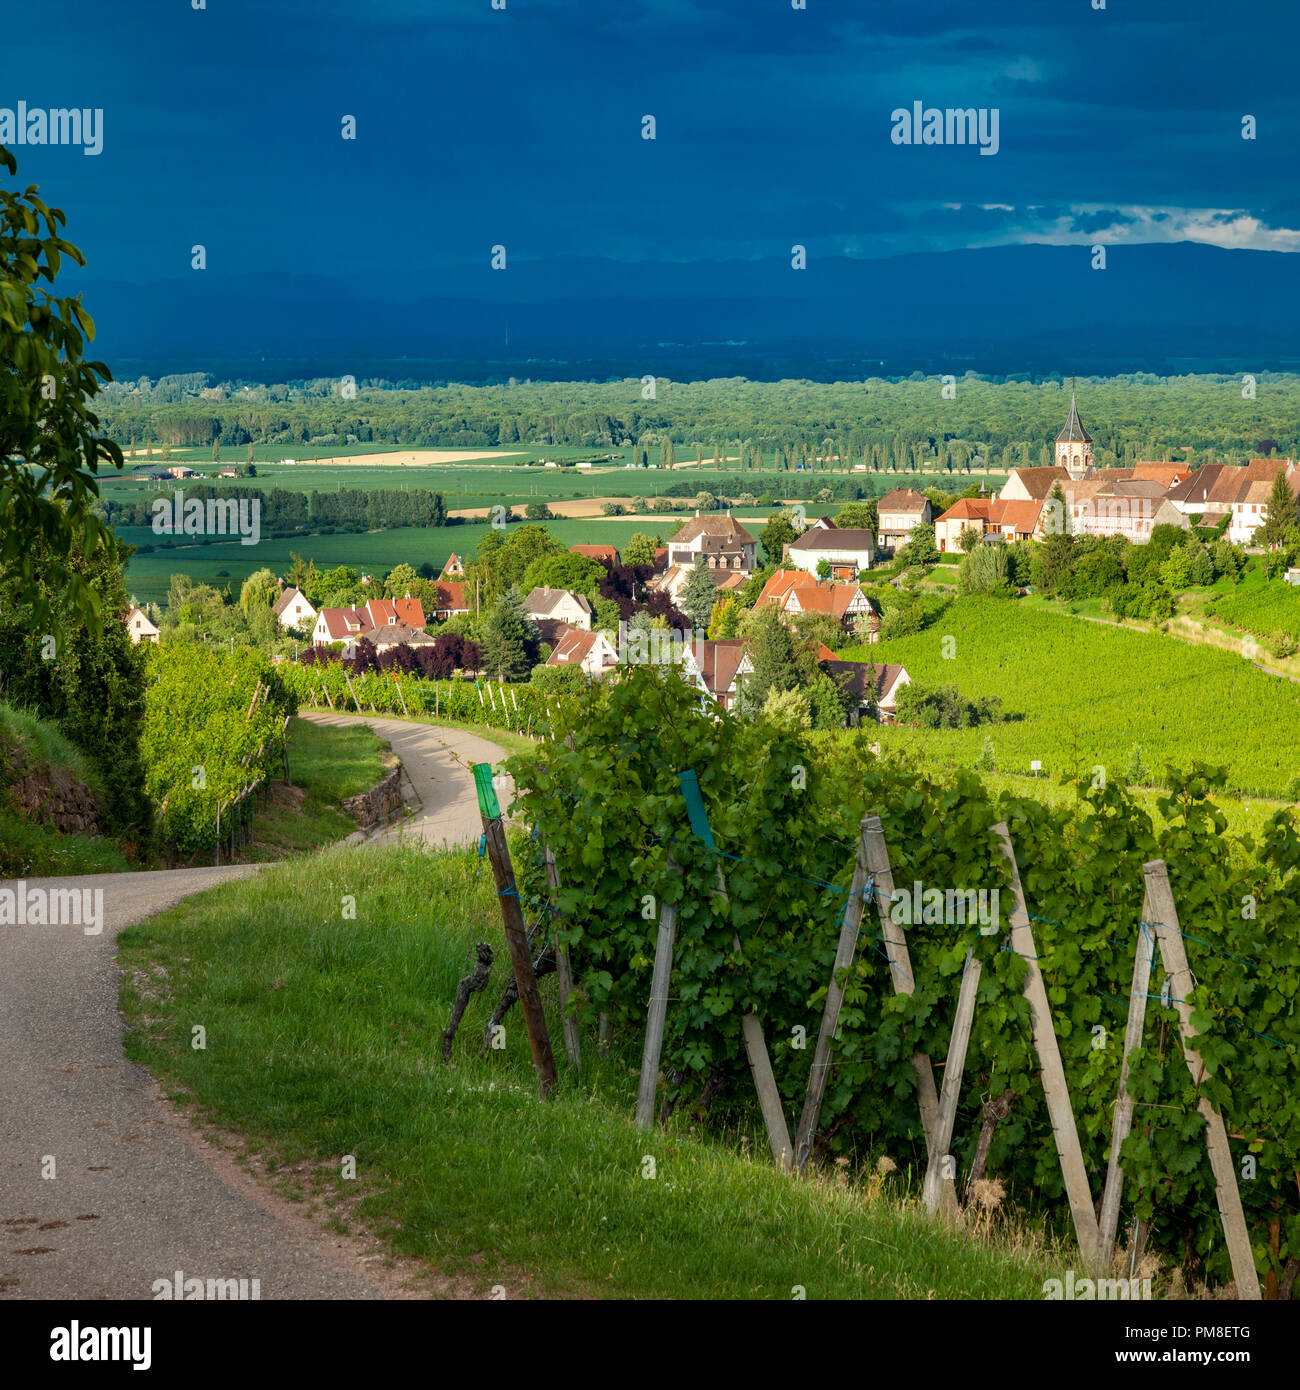 Setting sunlight on the vineyards of the Grand Cru and the village of Zellenberg in Alsace, Haut-Rhin France Stock Photo